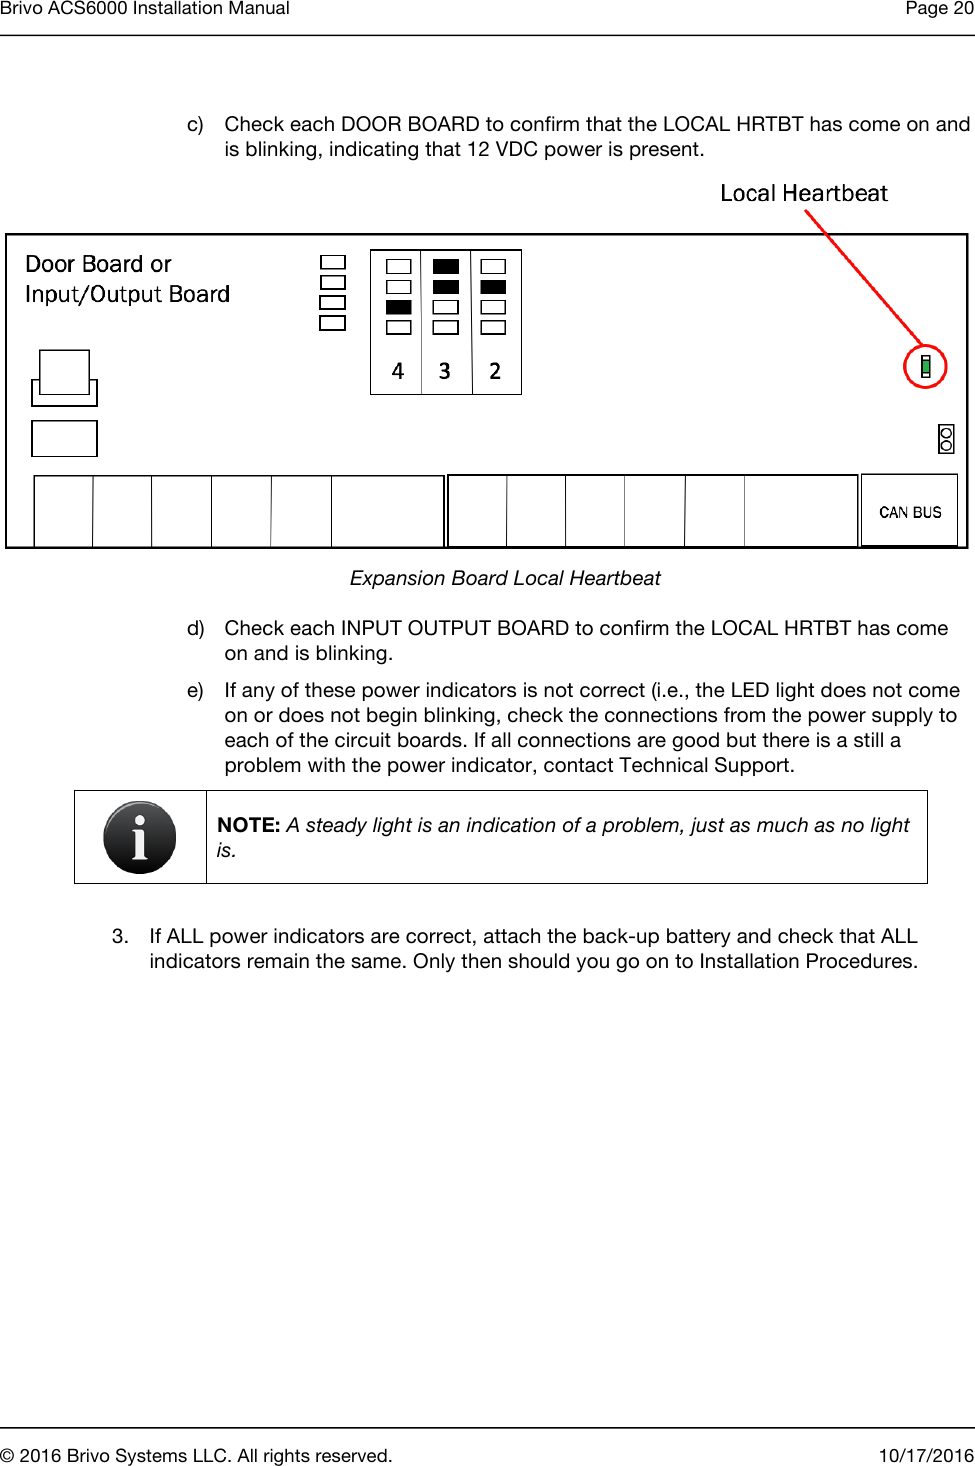 Brivo ACS6000 Installation Manual Page 20       © 2016 Brivo Systems LLC. All rights reserved. 10/17/2016    c) Check each DOOR BOARD to confirm that the LOCAL HRTBT has come on and is blinking, indicating that 12 VDC power is present.  Expansion Board Local Heartbeat d) Check each INPUT OUTPUT BOARD to confirm the LOCAL HRTBT has come on and is blinking. e) If any of these power indicators is not correct (i.e., the LED light does not come on or does not begin blinking, check the connections from the power supply to each of the circuit boards. If all connections are good but there is a still a problem with the power indicator, contact Technical Support.   NOTE: A steady light is an indication of a problem, just as much as no light is.  3. If ALL power indicators are correct, attach the back-up battery and check that ALL indicators remain the same. Only then should you go on to Installation Procedures. 